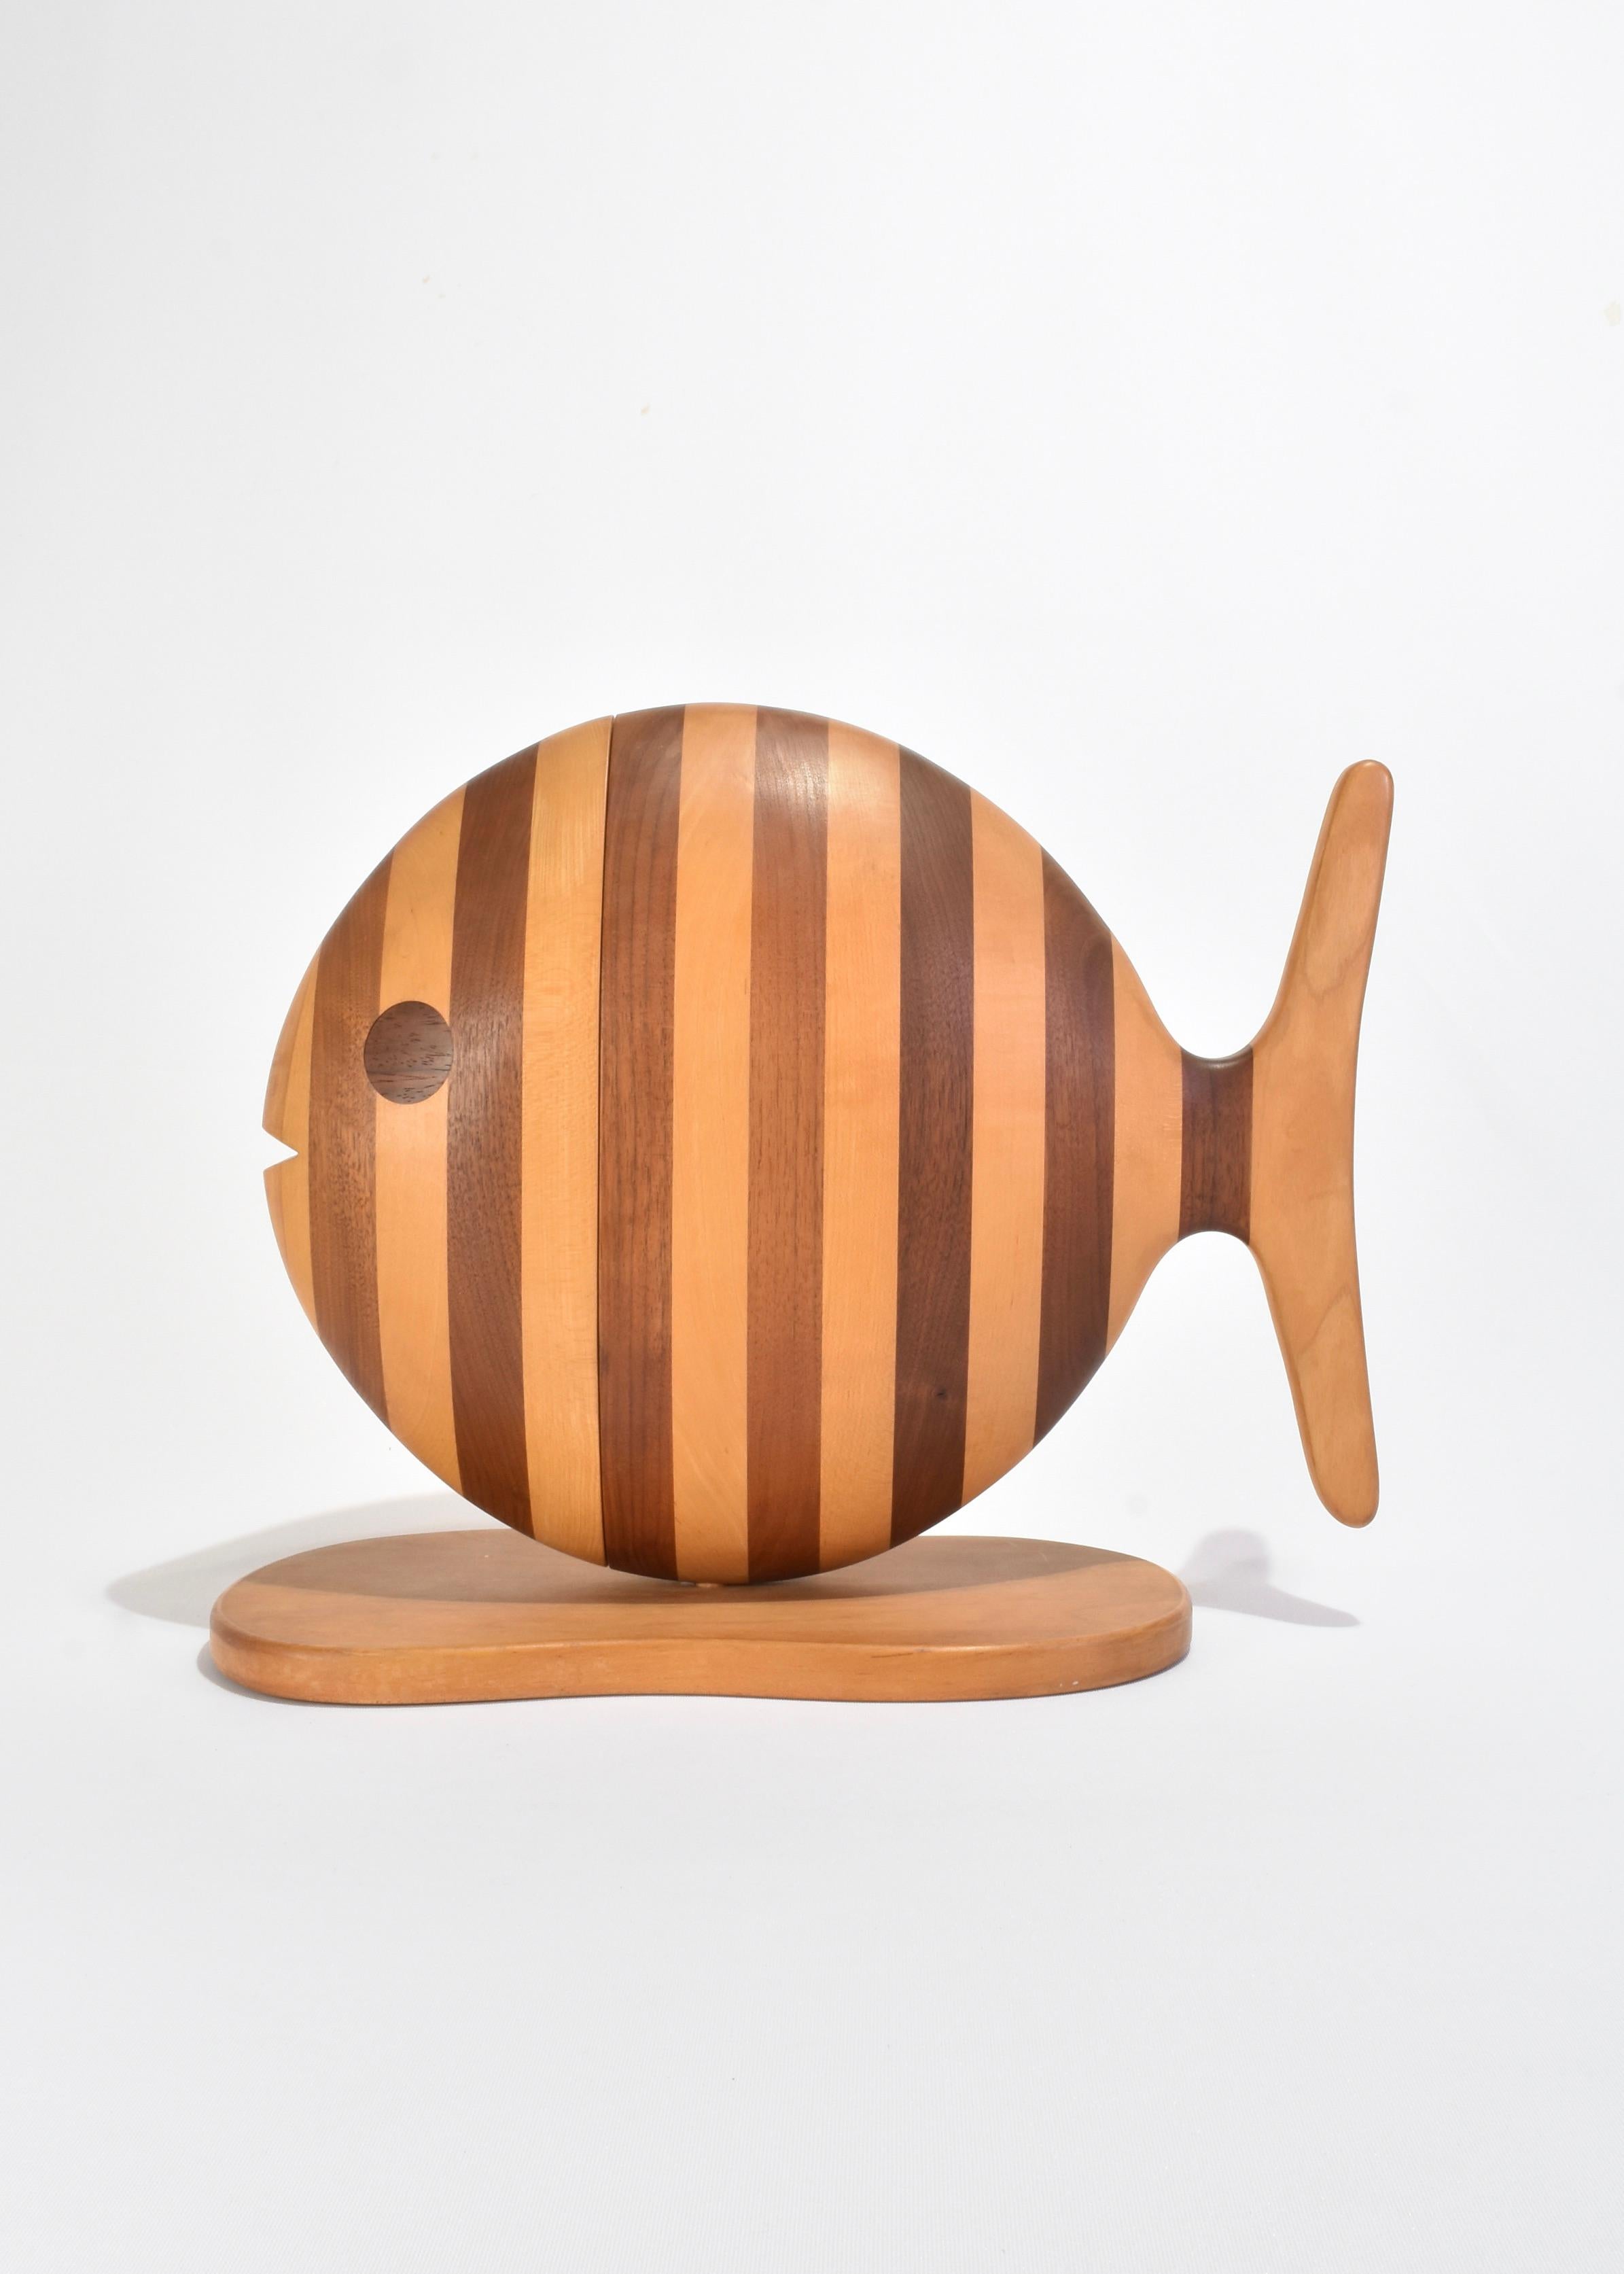 Rare vintage hand-crafted wood jewelry box in the shape of a fish with stripe detail and three sliding drawers. Box has a magnetic closure and removable base. Signed on base, Gene Sherer 1984.